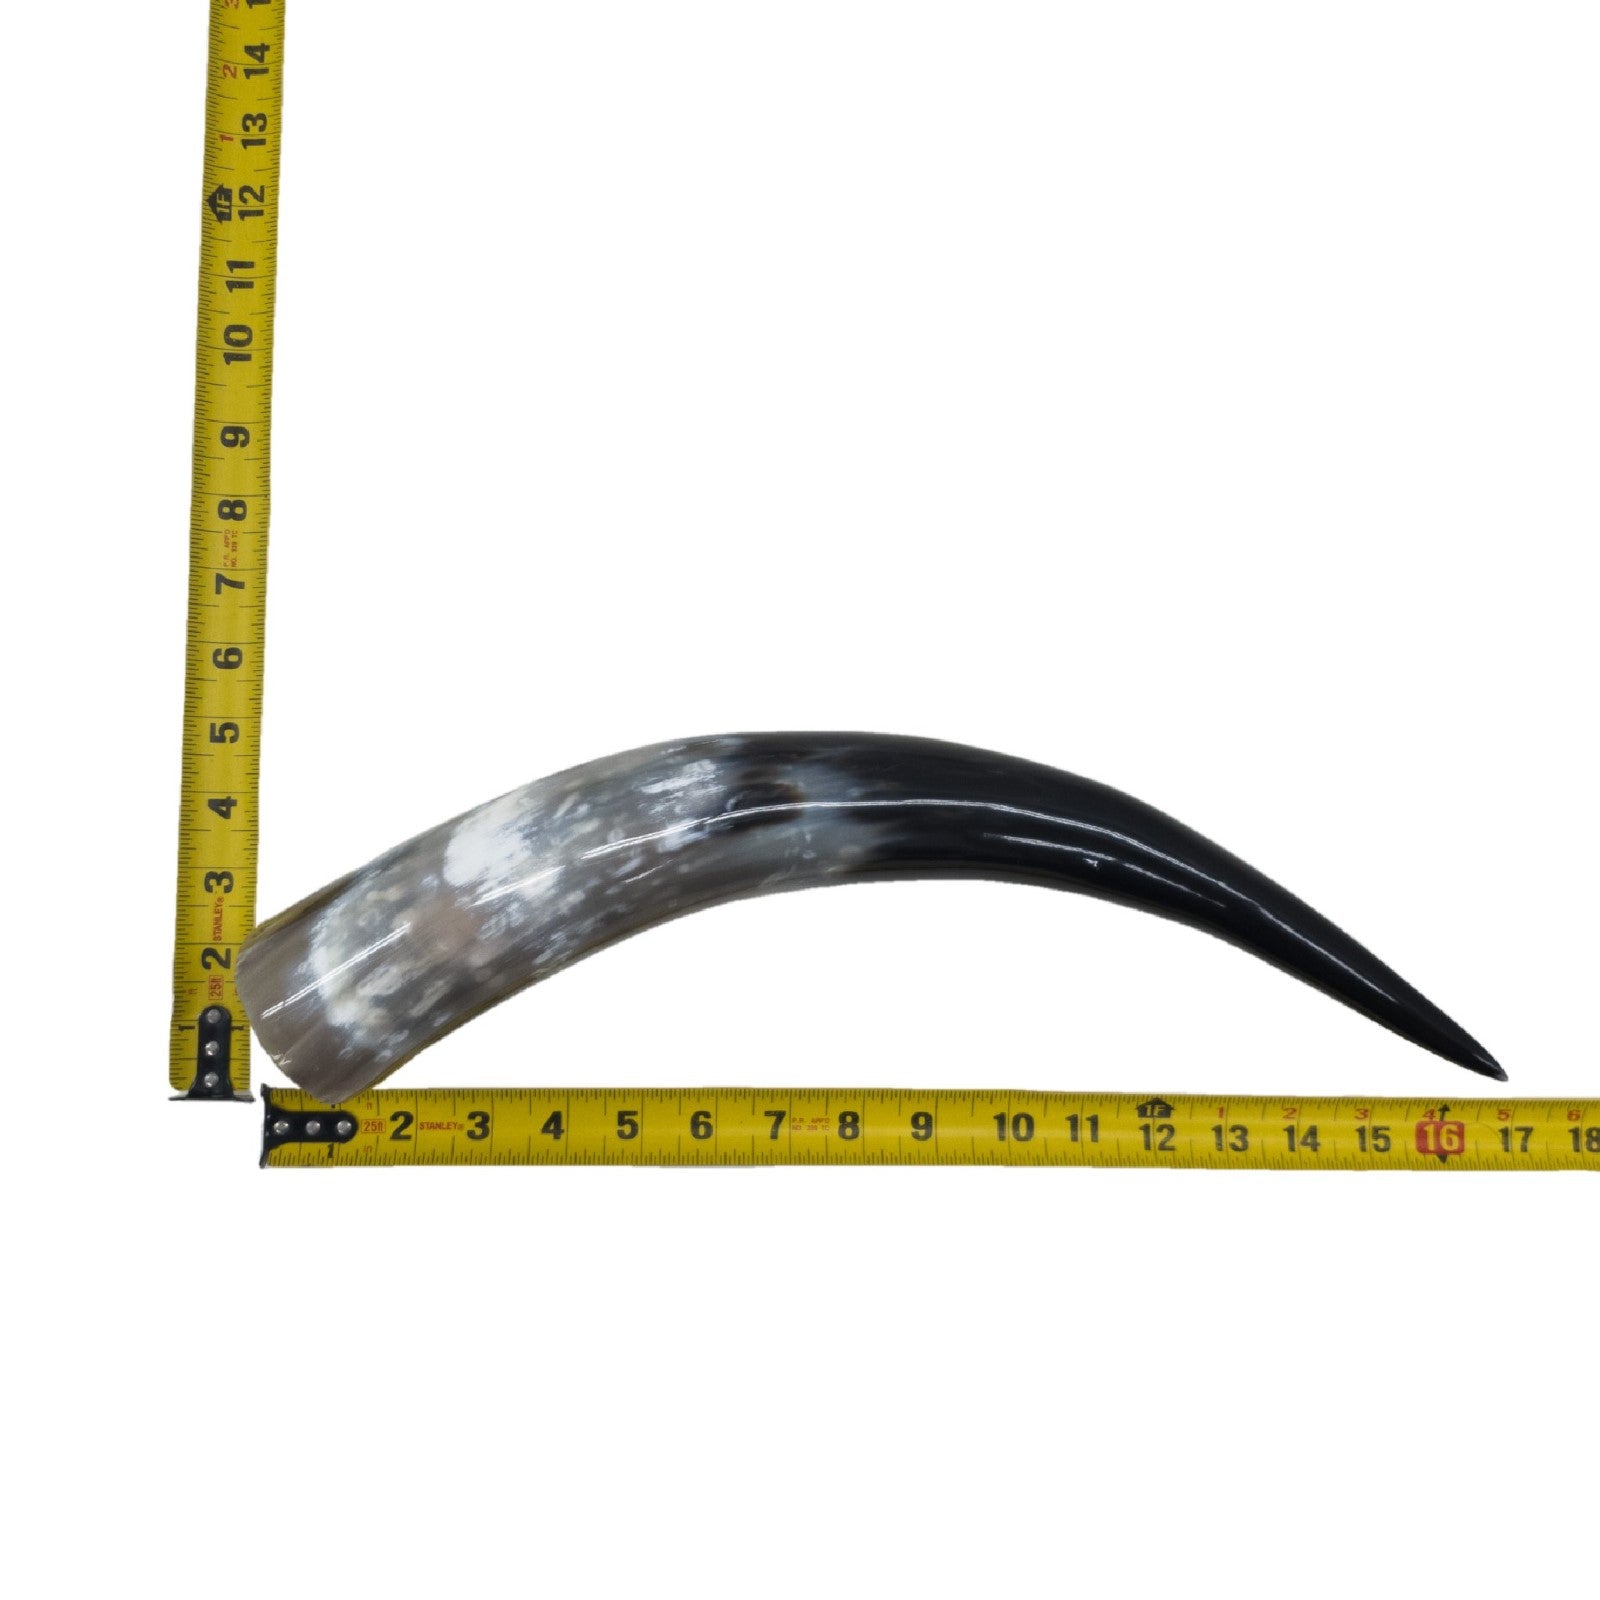 13" - 17" Single Polished Cow Horns, 23 (16") | The Leather Guy